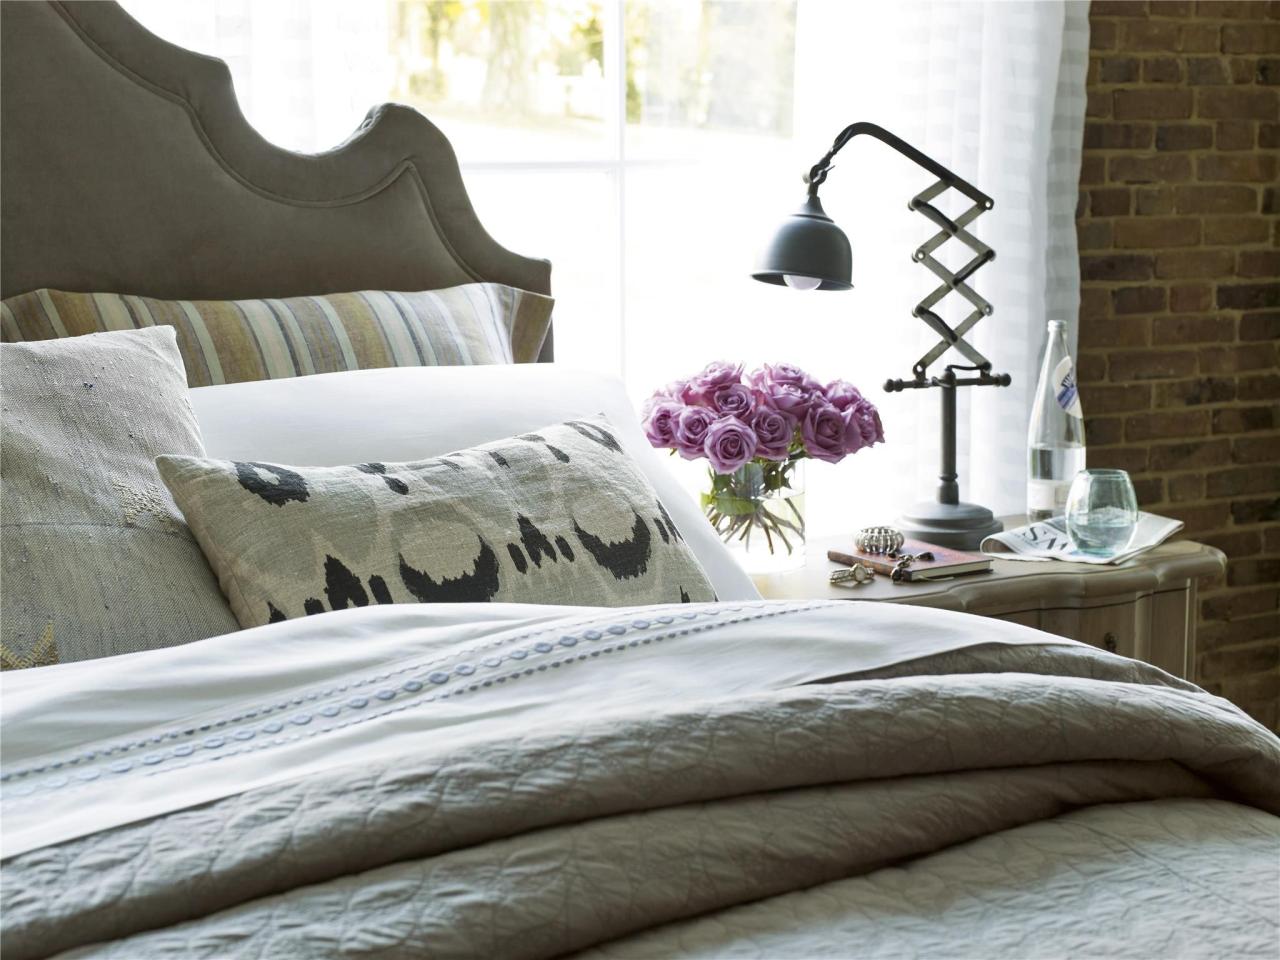 Mixing Textiles for a Luxurious Bedroom Feel